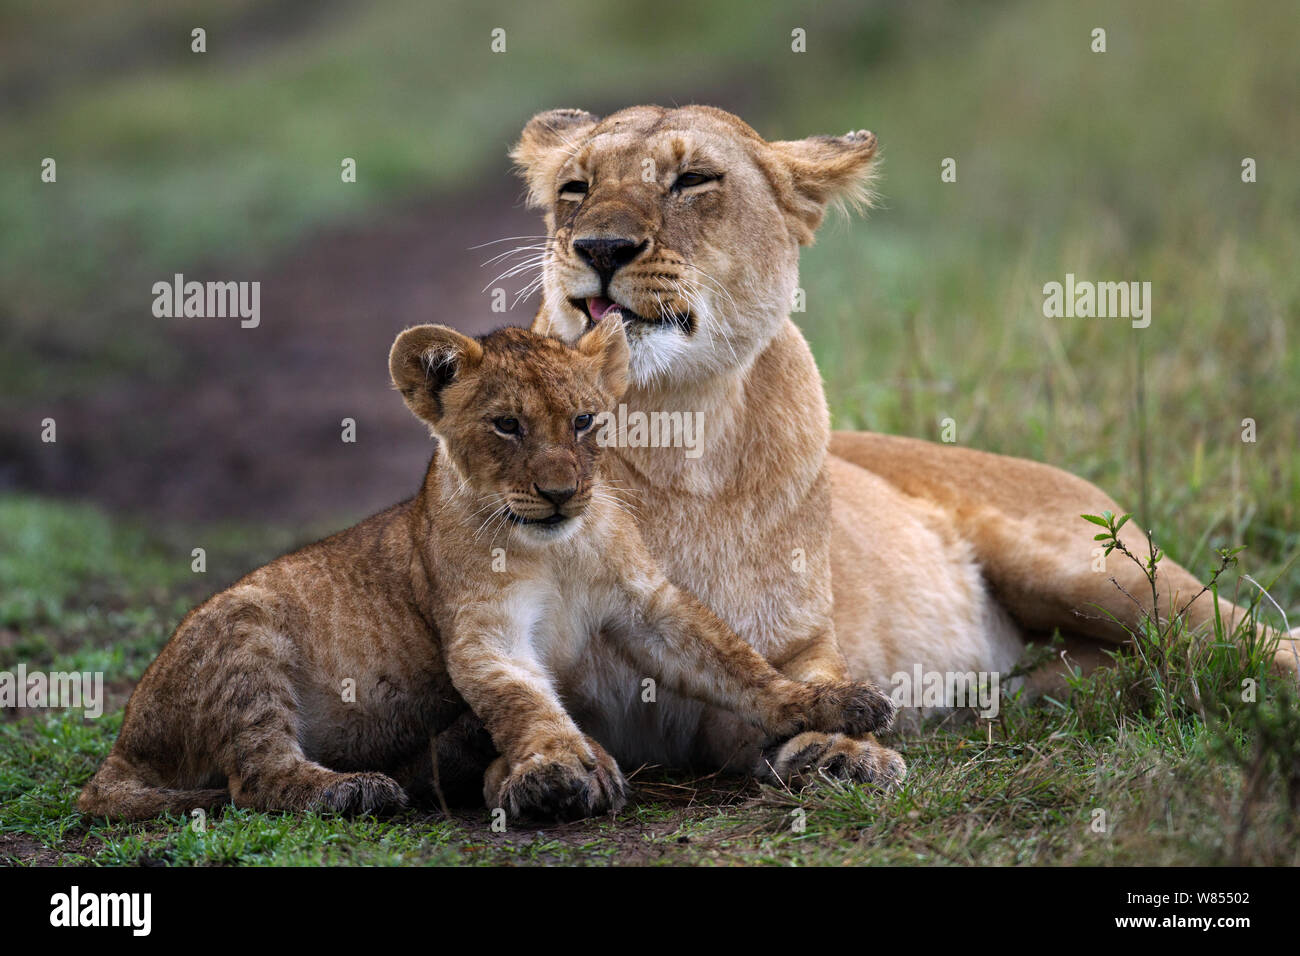 Lioness (Panthera leo) trying to groom her playful cub aged about 6 months, Masai Mara National Reserve, Kenya, September Stock Photo